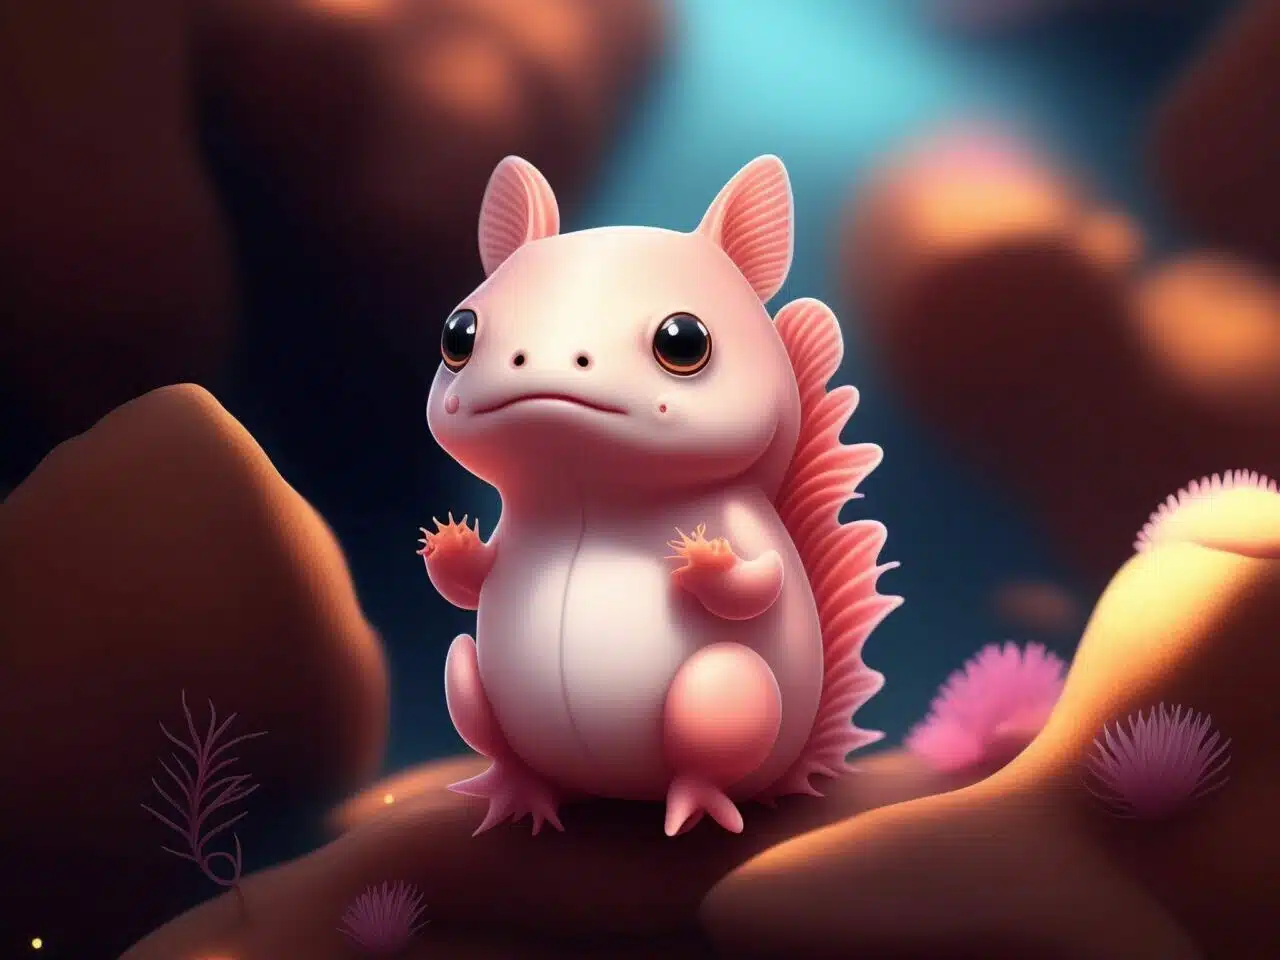 Another cute illustration of an axolotl